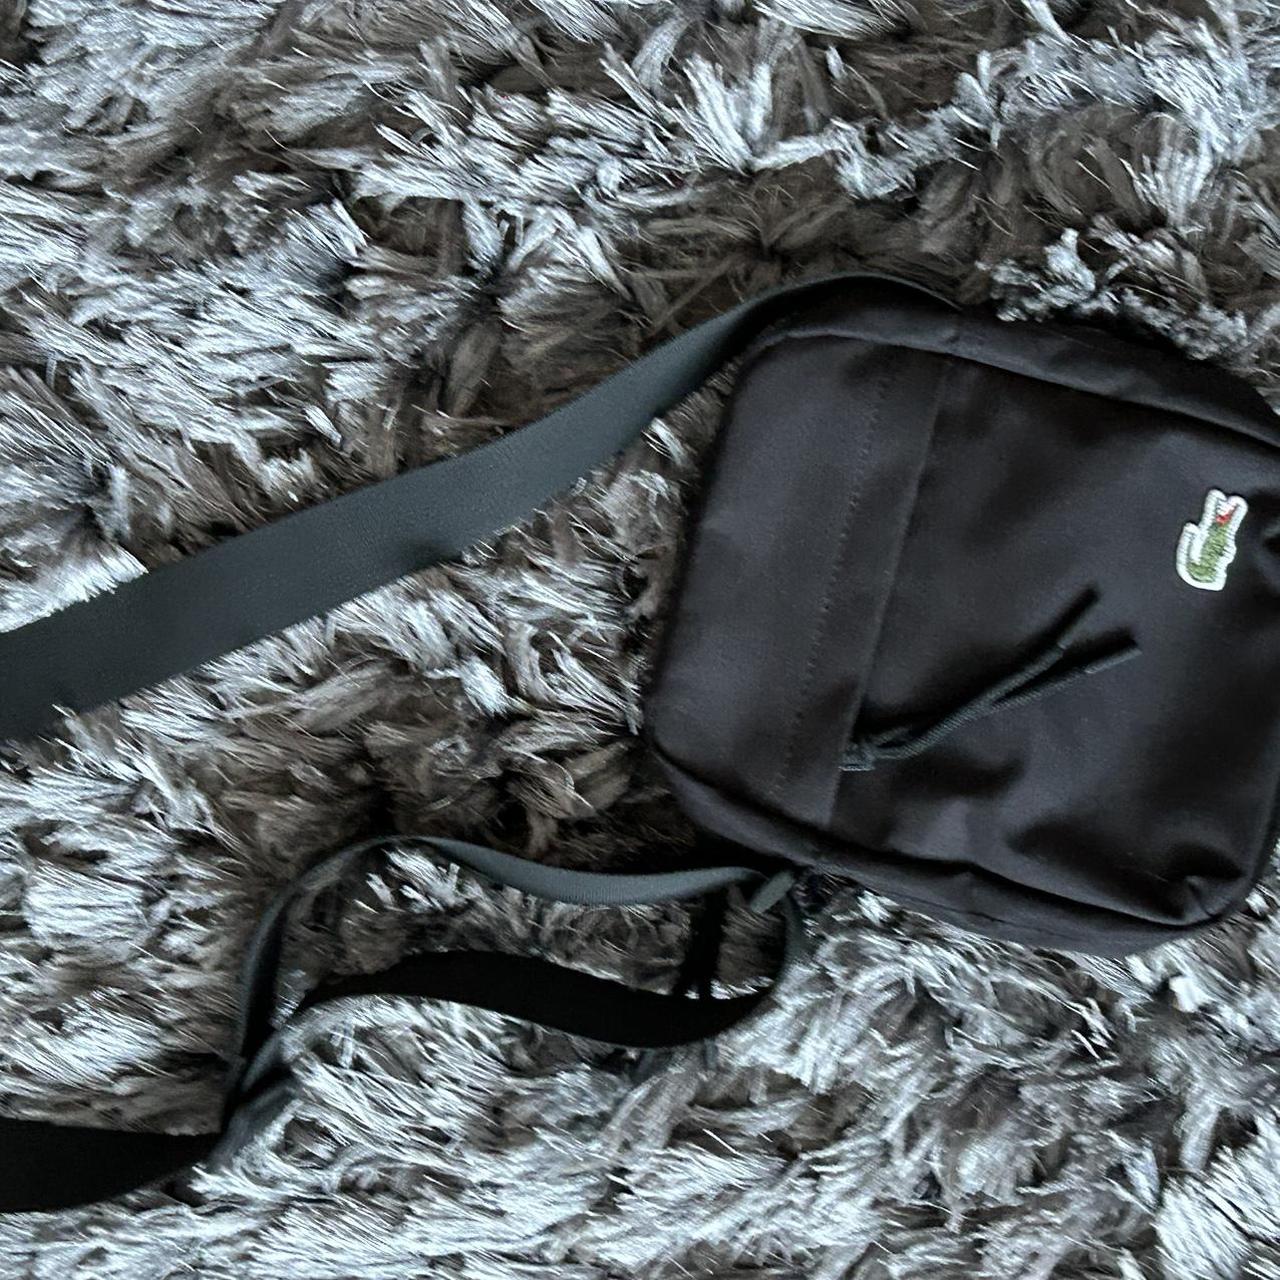 Lacoste side-bag Dm for inquiries or offers - Depop